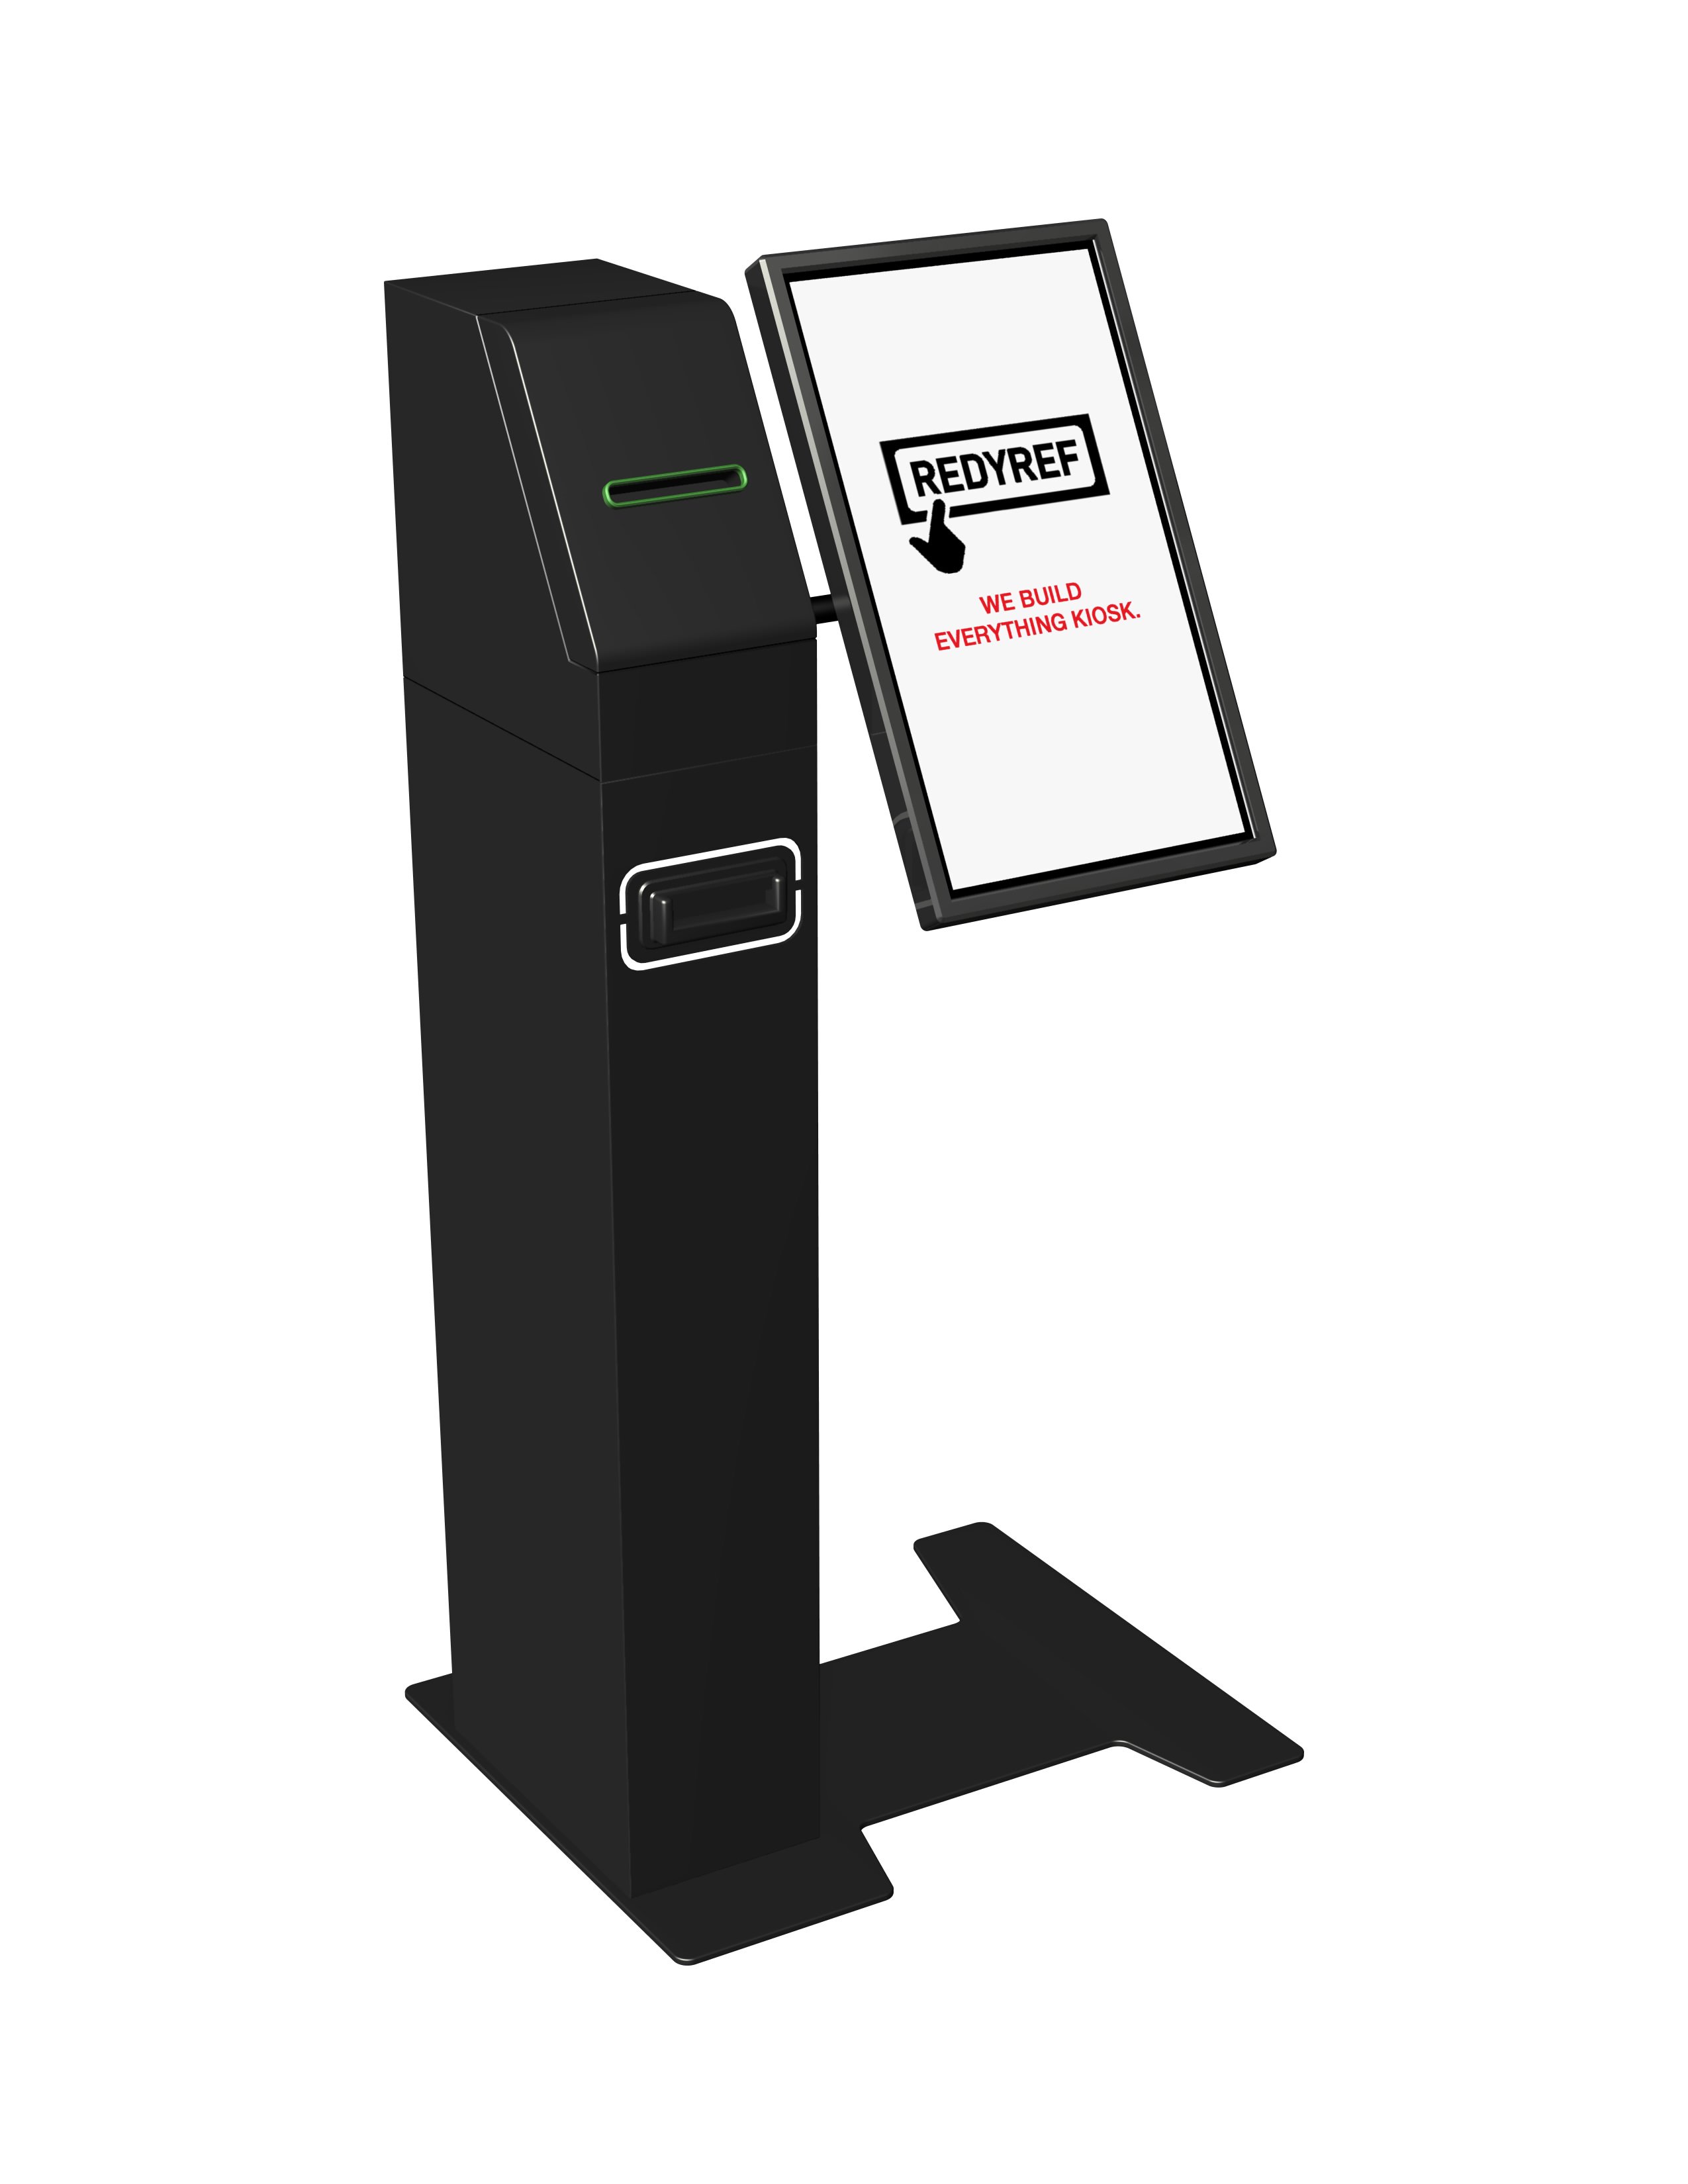 Prodigy Kiosk for Bill Payment